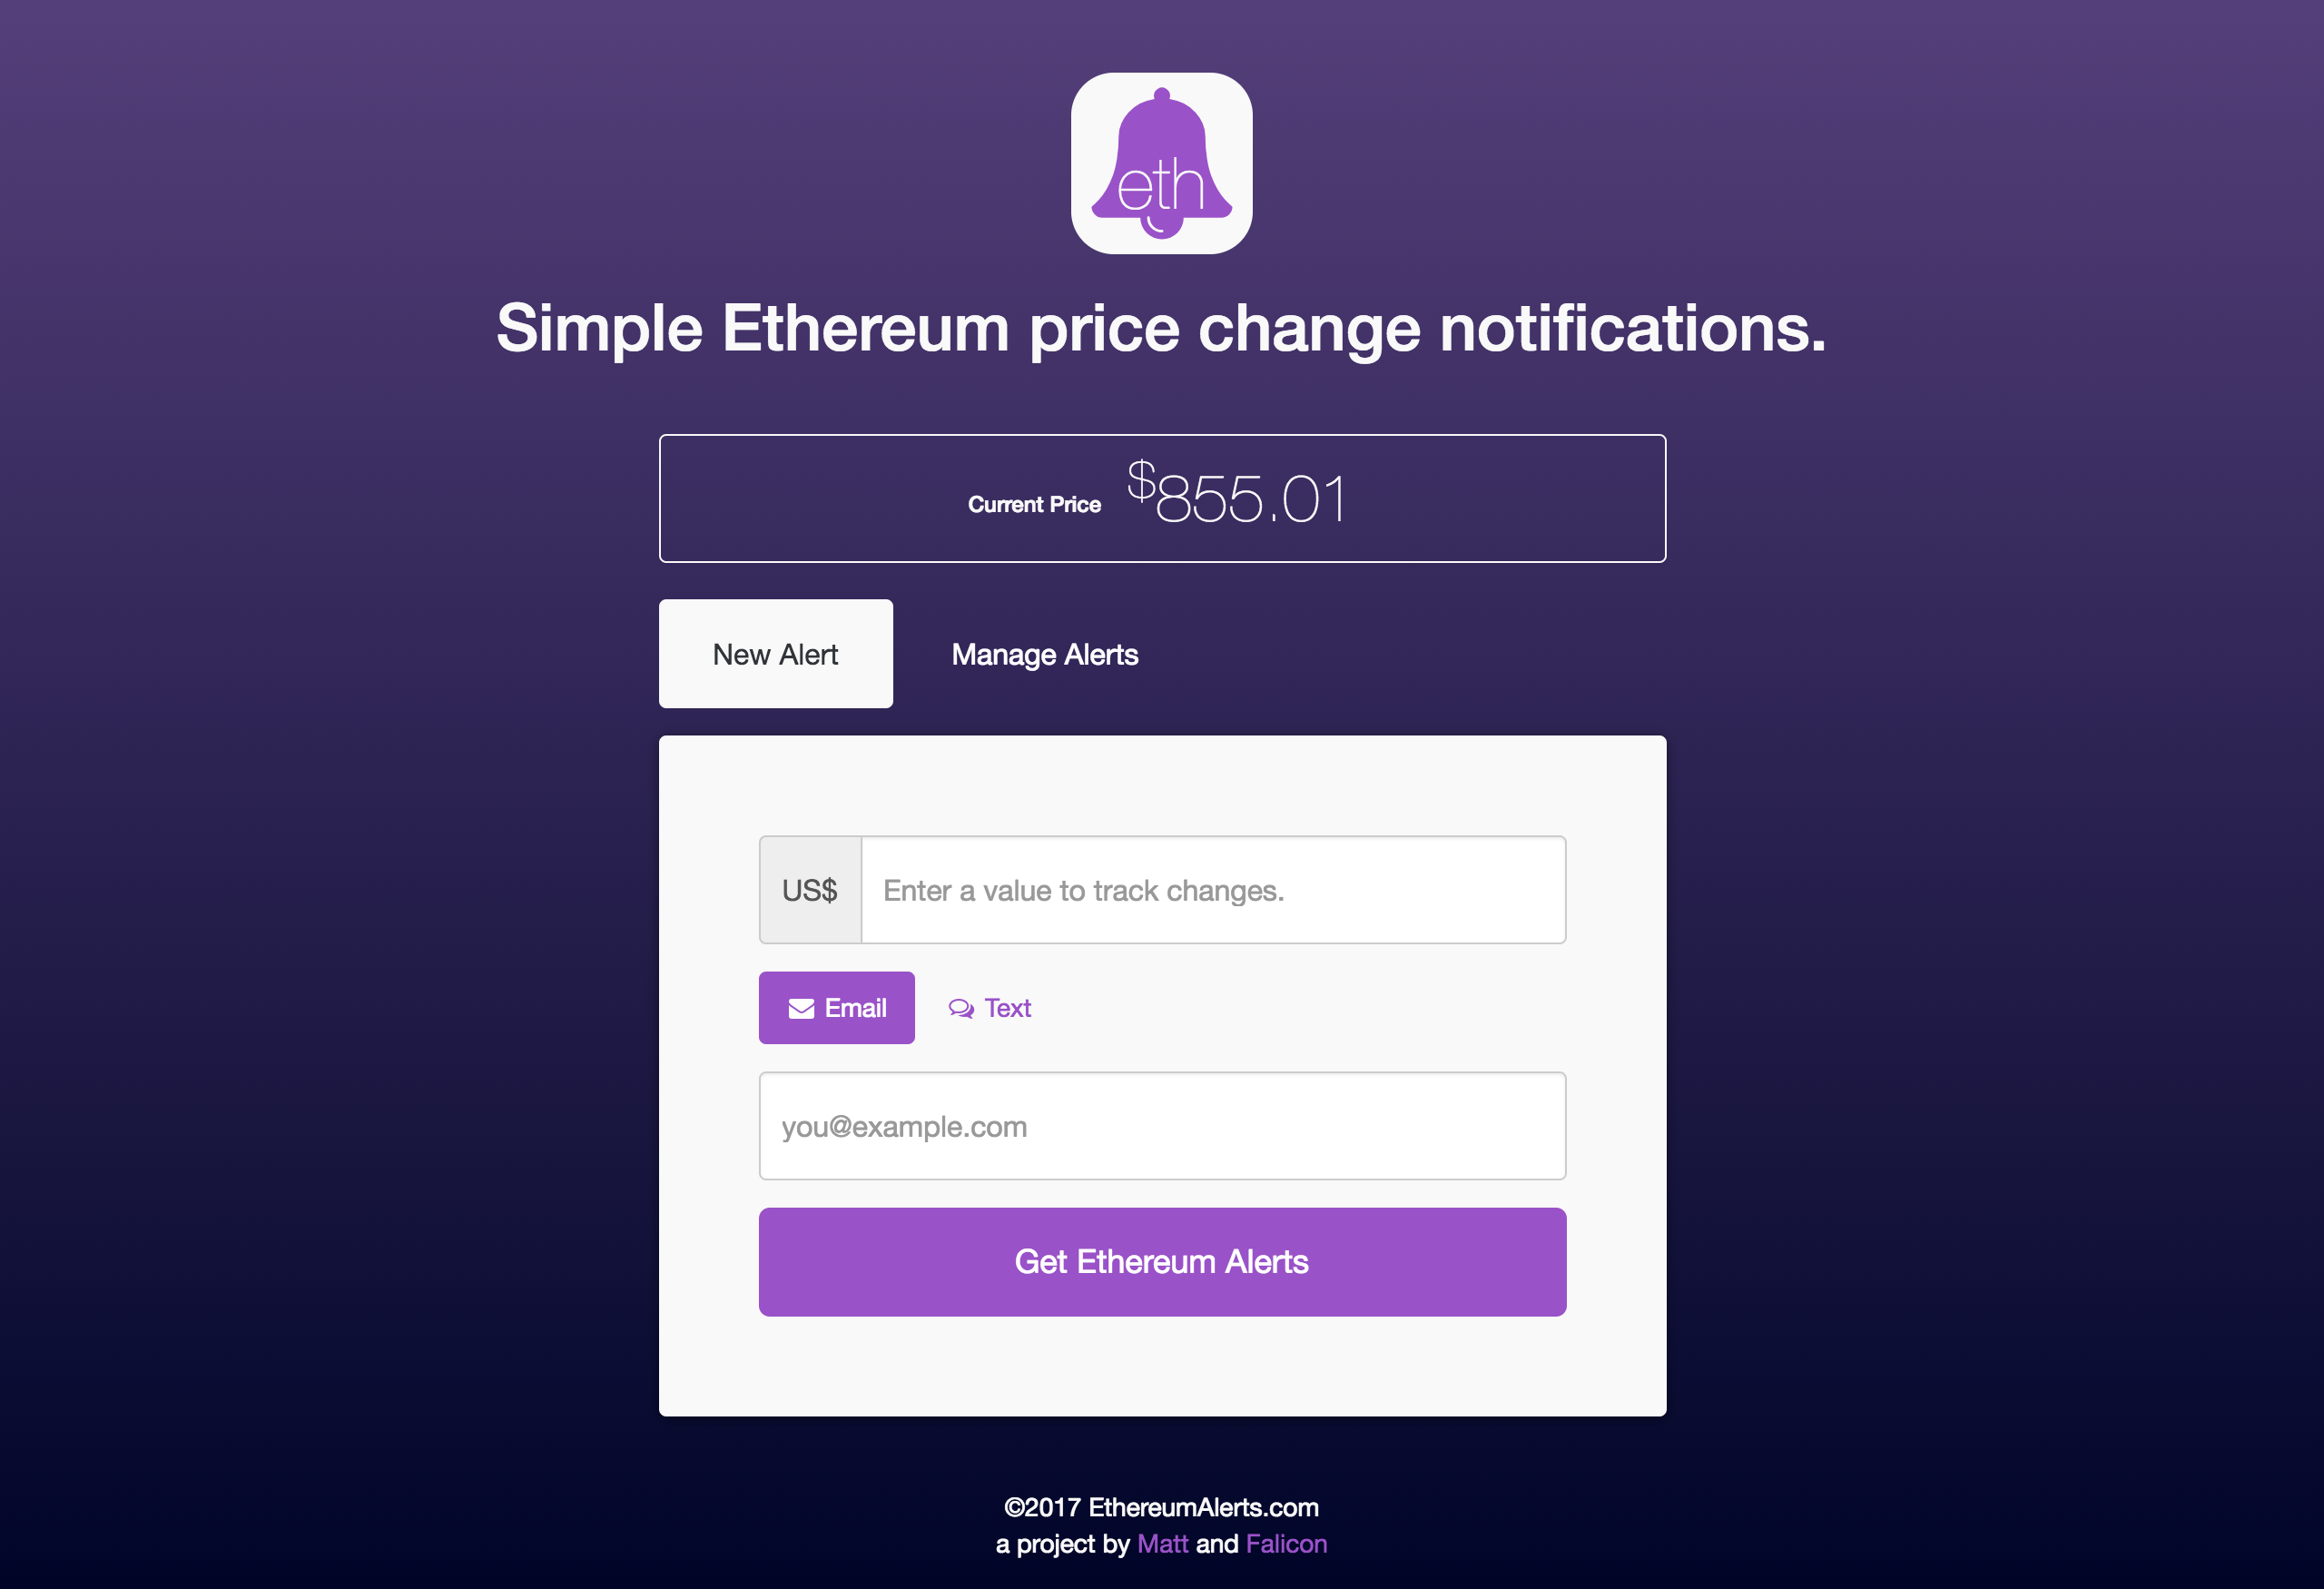 Ethereum Alerts App User Interface Design by Matt Gagliano showing Current Price of Ethereum and New Alerts section